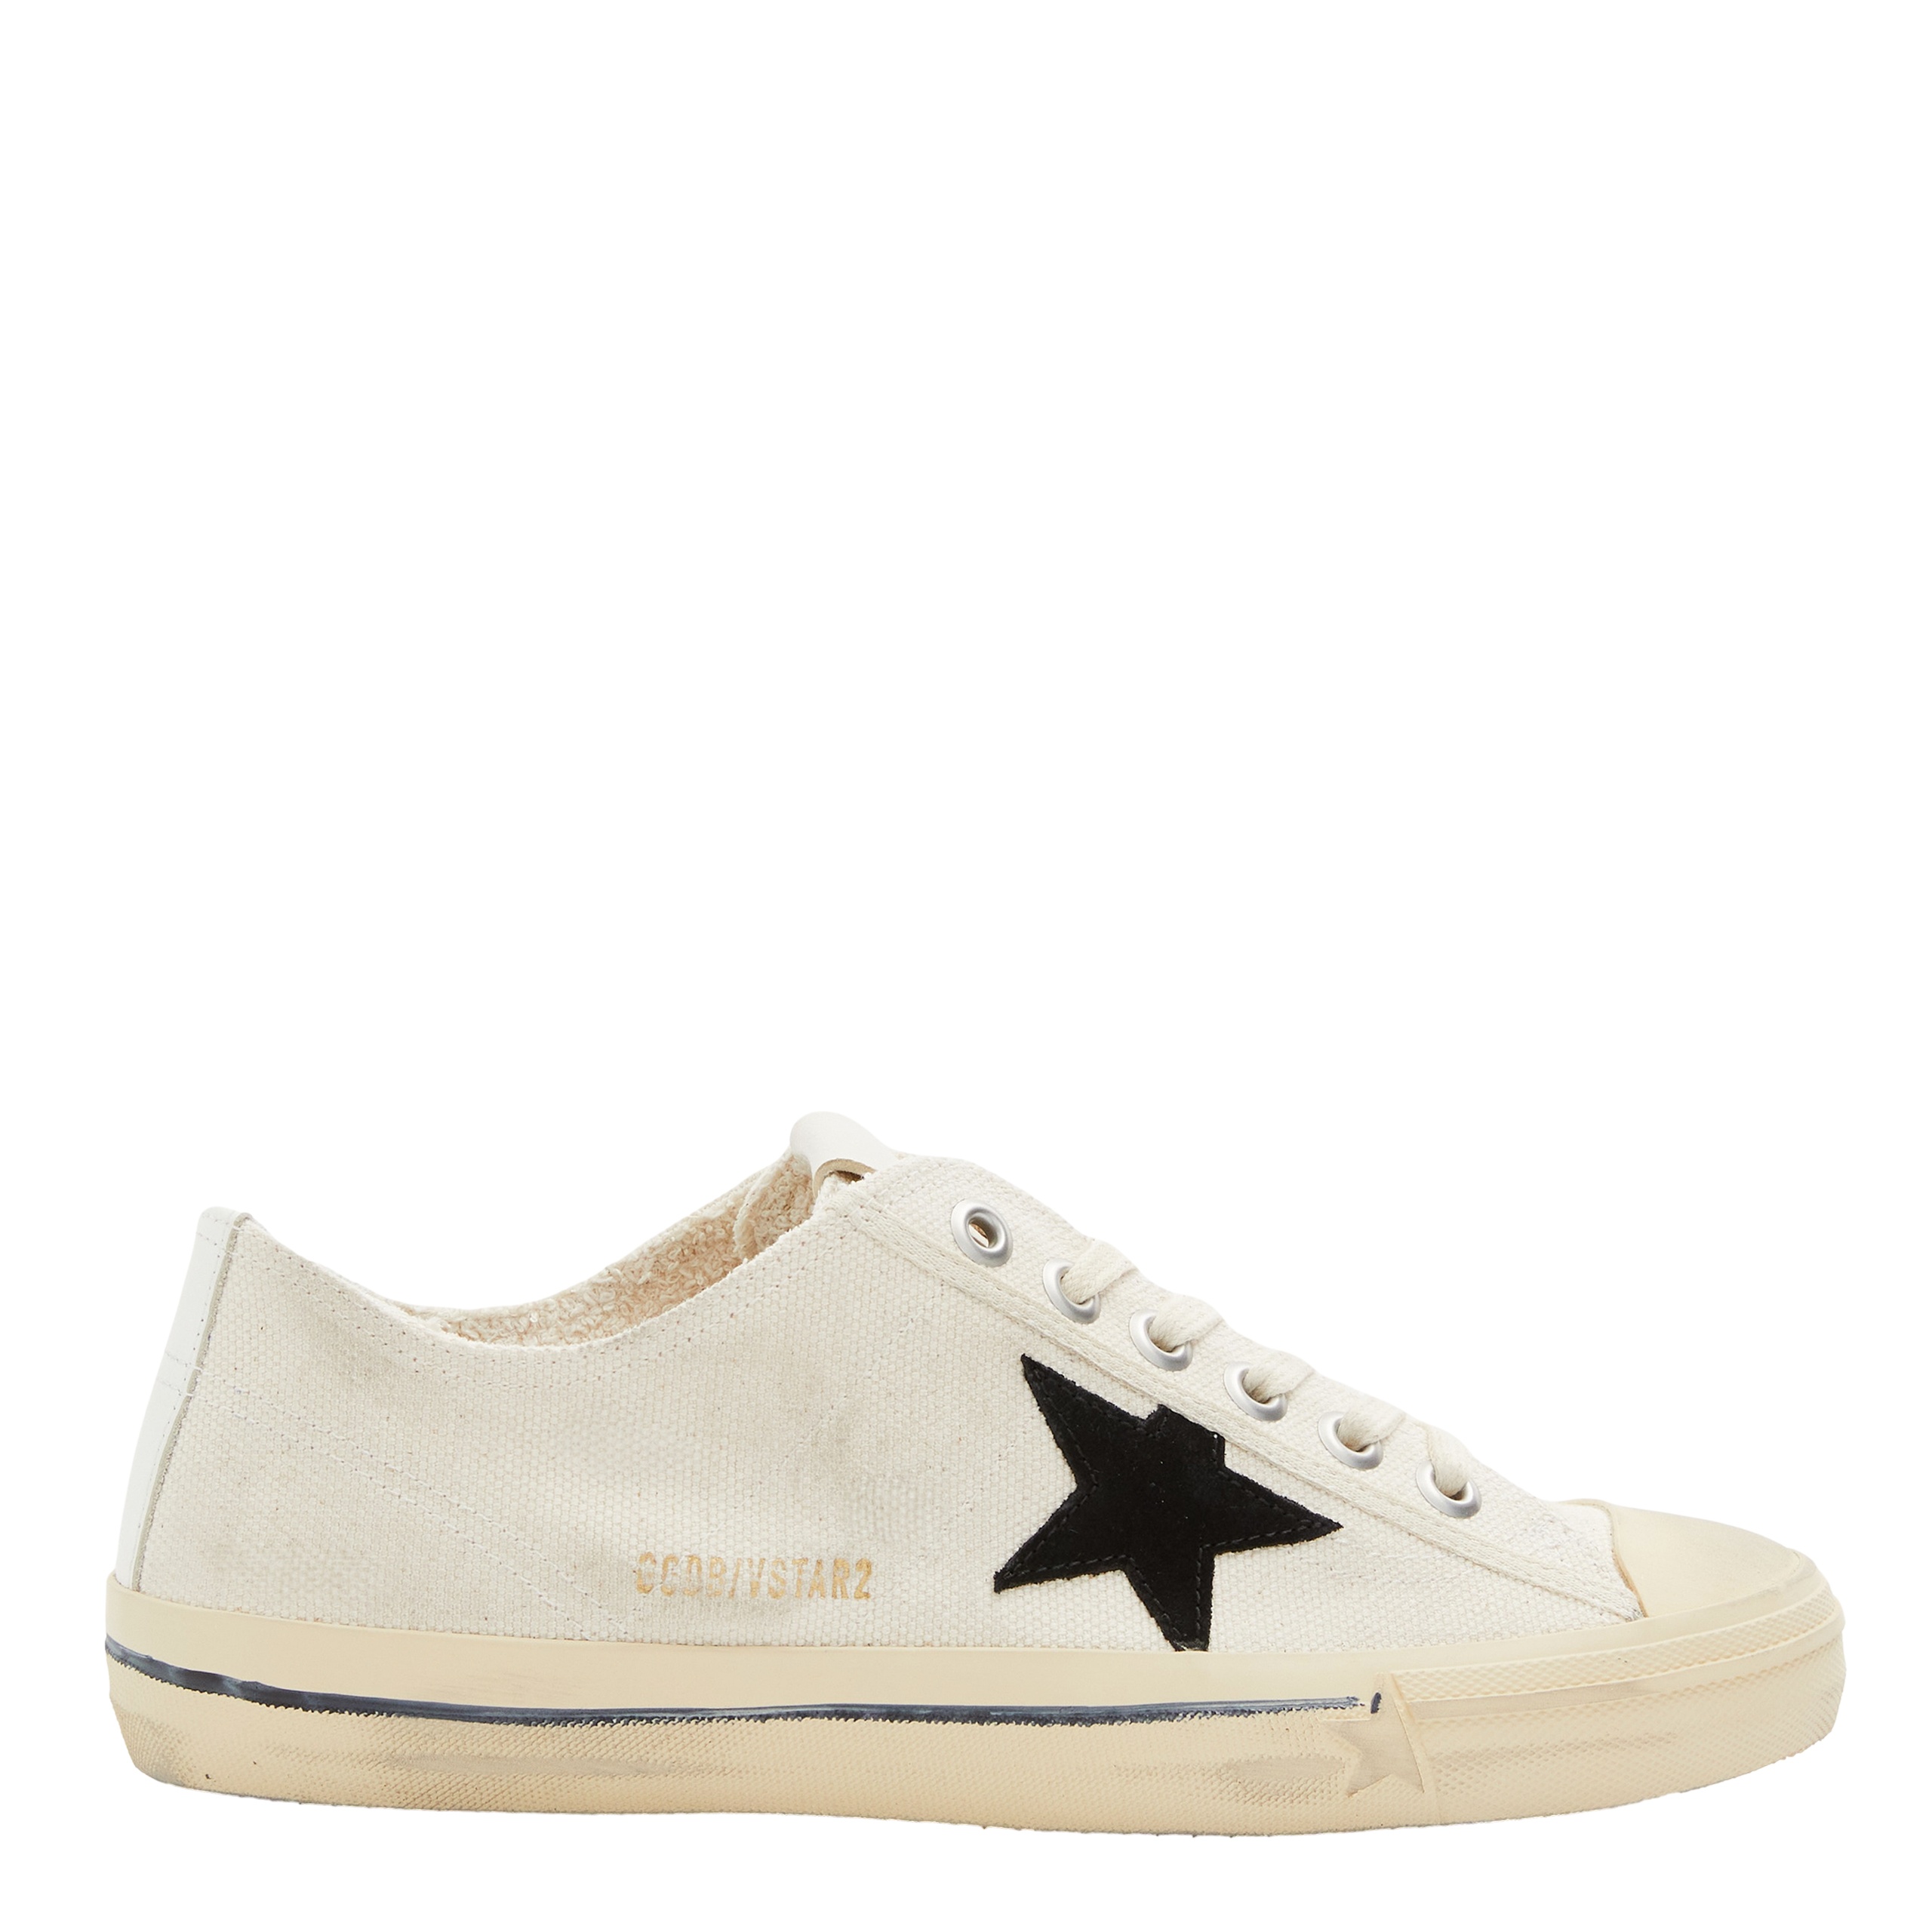 V-STAR CANVAS SNEAKERS - 5